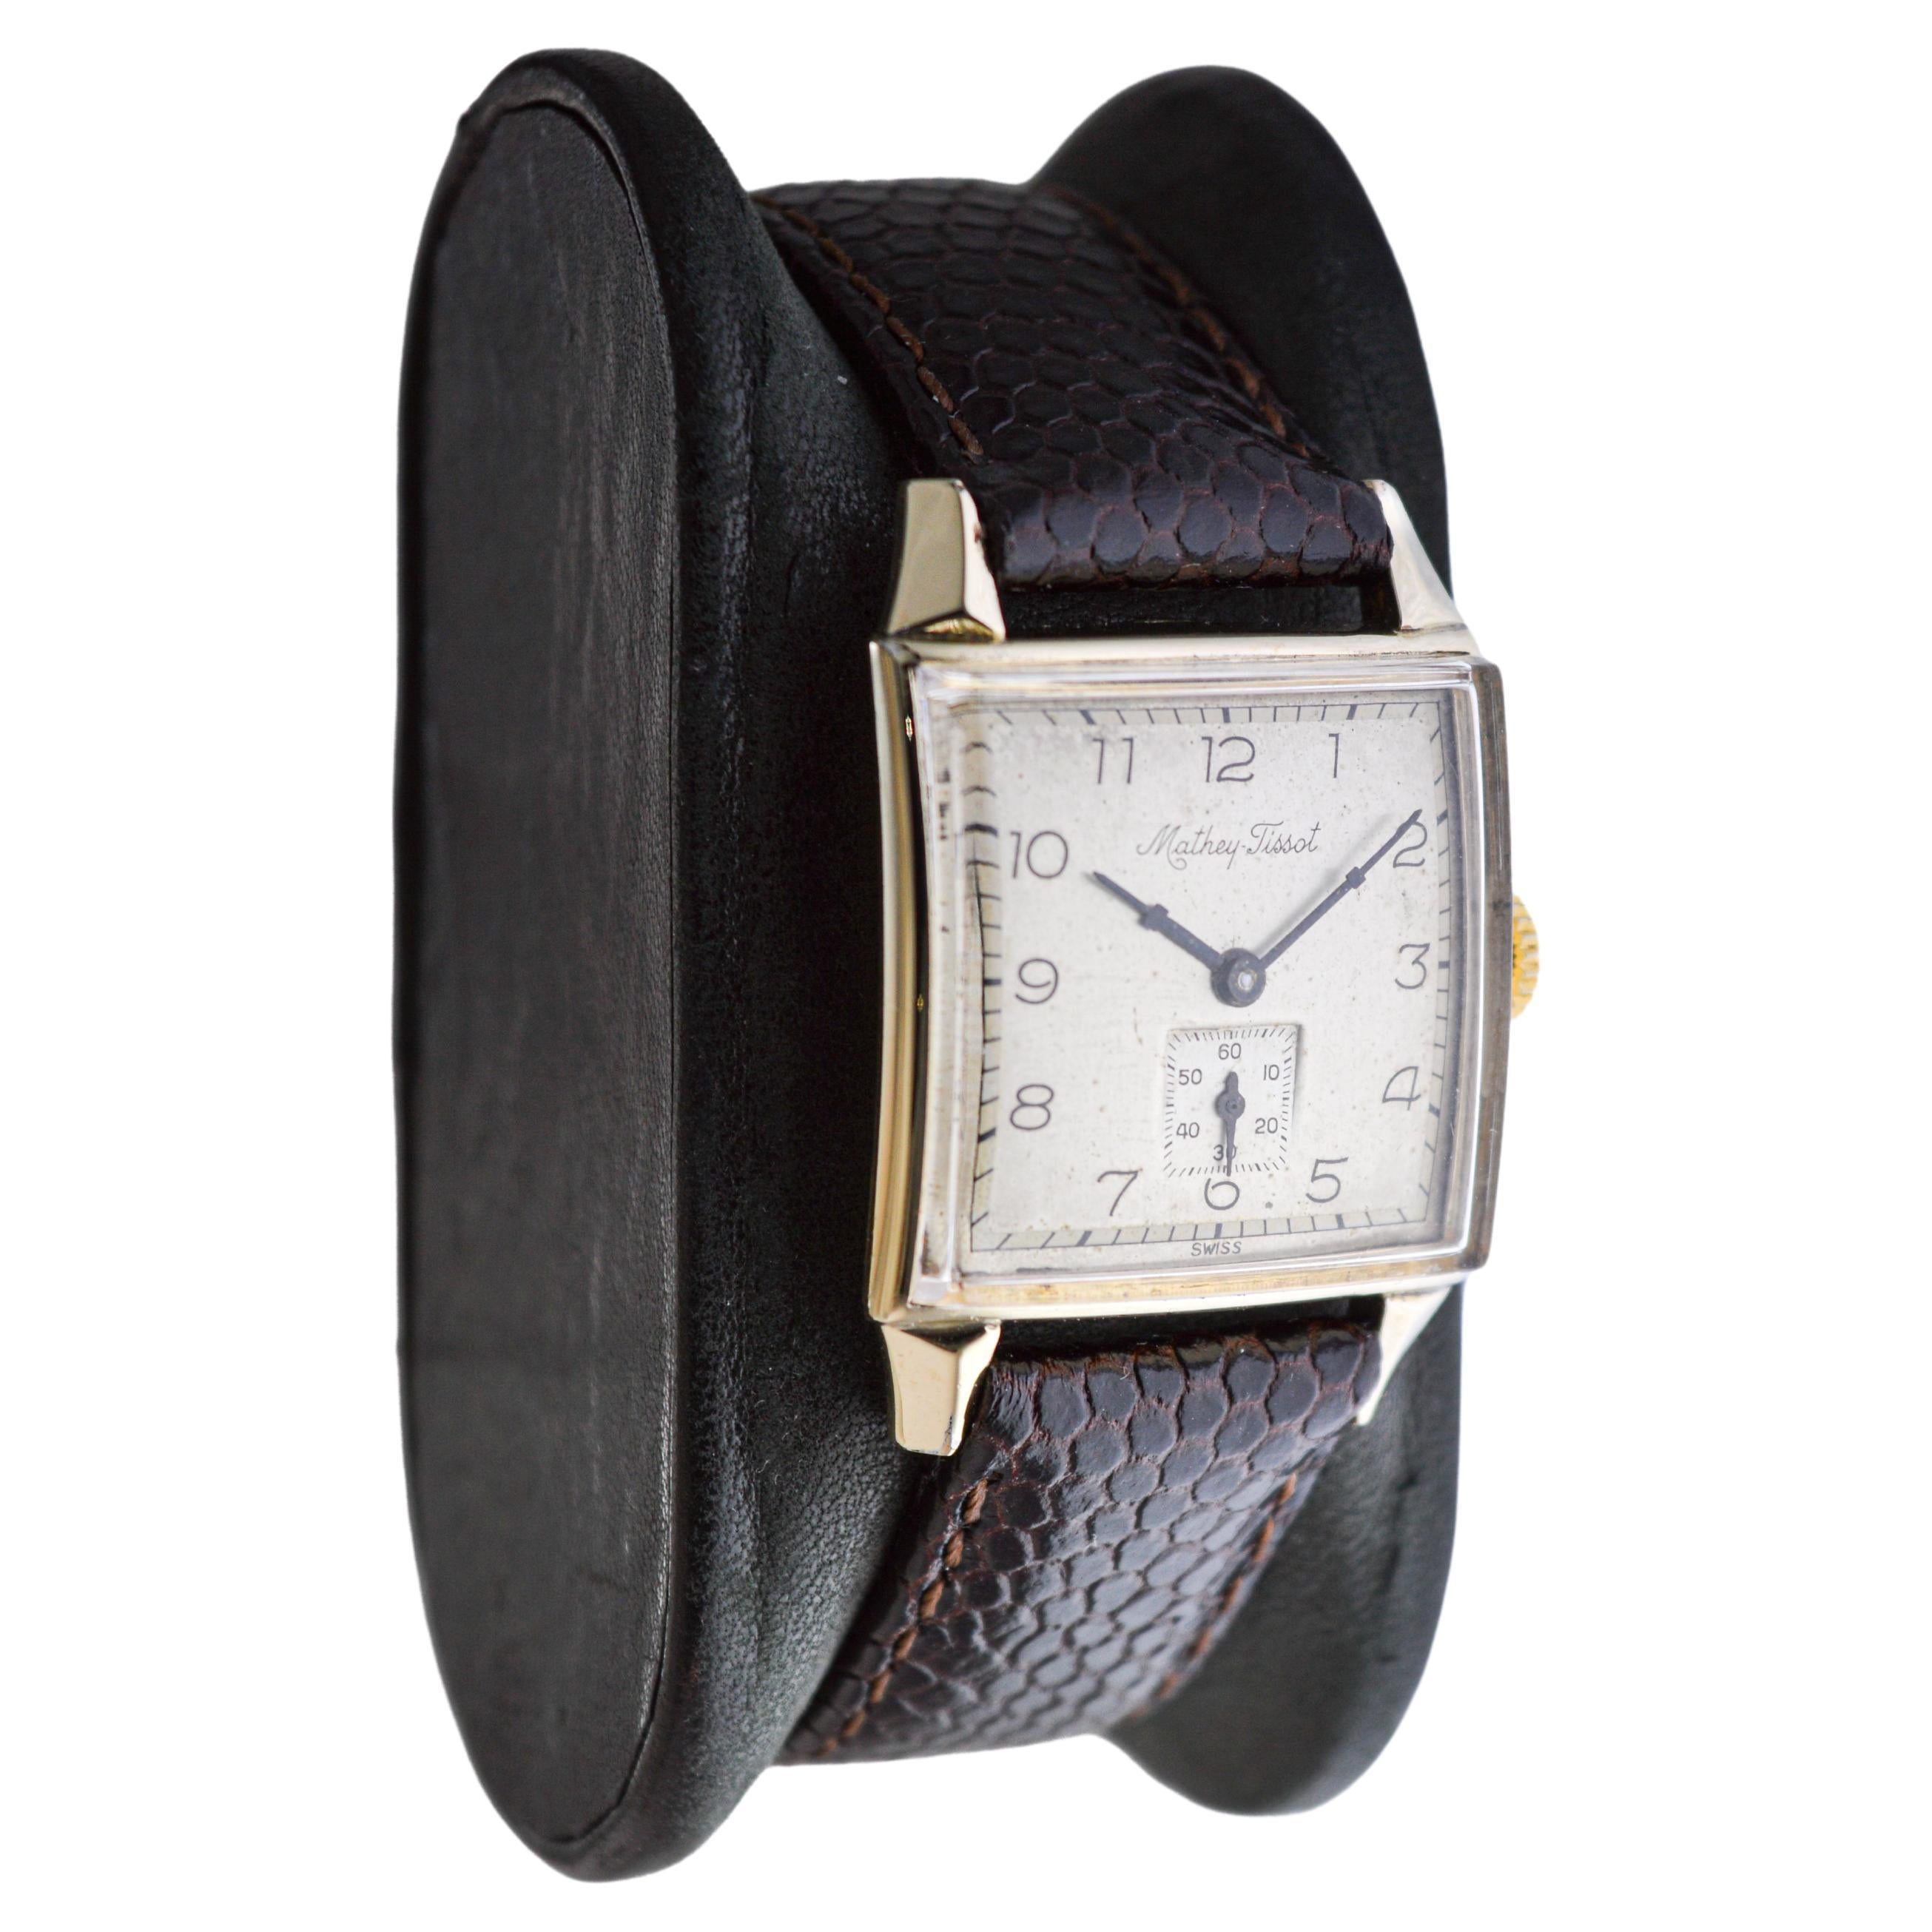 FACTORY / HOUSE: Mathey Tissot Watch Company
STYLE / REFERENCE: Art Deco Tank Style 
METAL / MATERIAL: 14k Gold Filled
CIRCA / YEAR: 1940's
DIMENSIONS / SIZE: Length 35mm x Width 25mm
MOVEMENT / CALIBER: Manual Winding / 17 Jewels / Cal.404
DIAL /